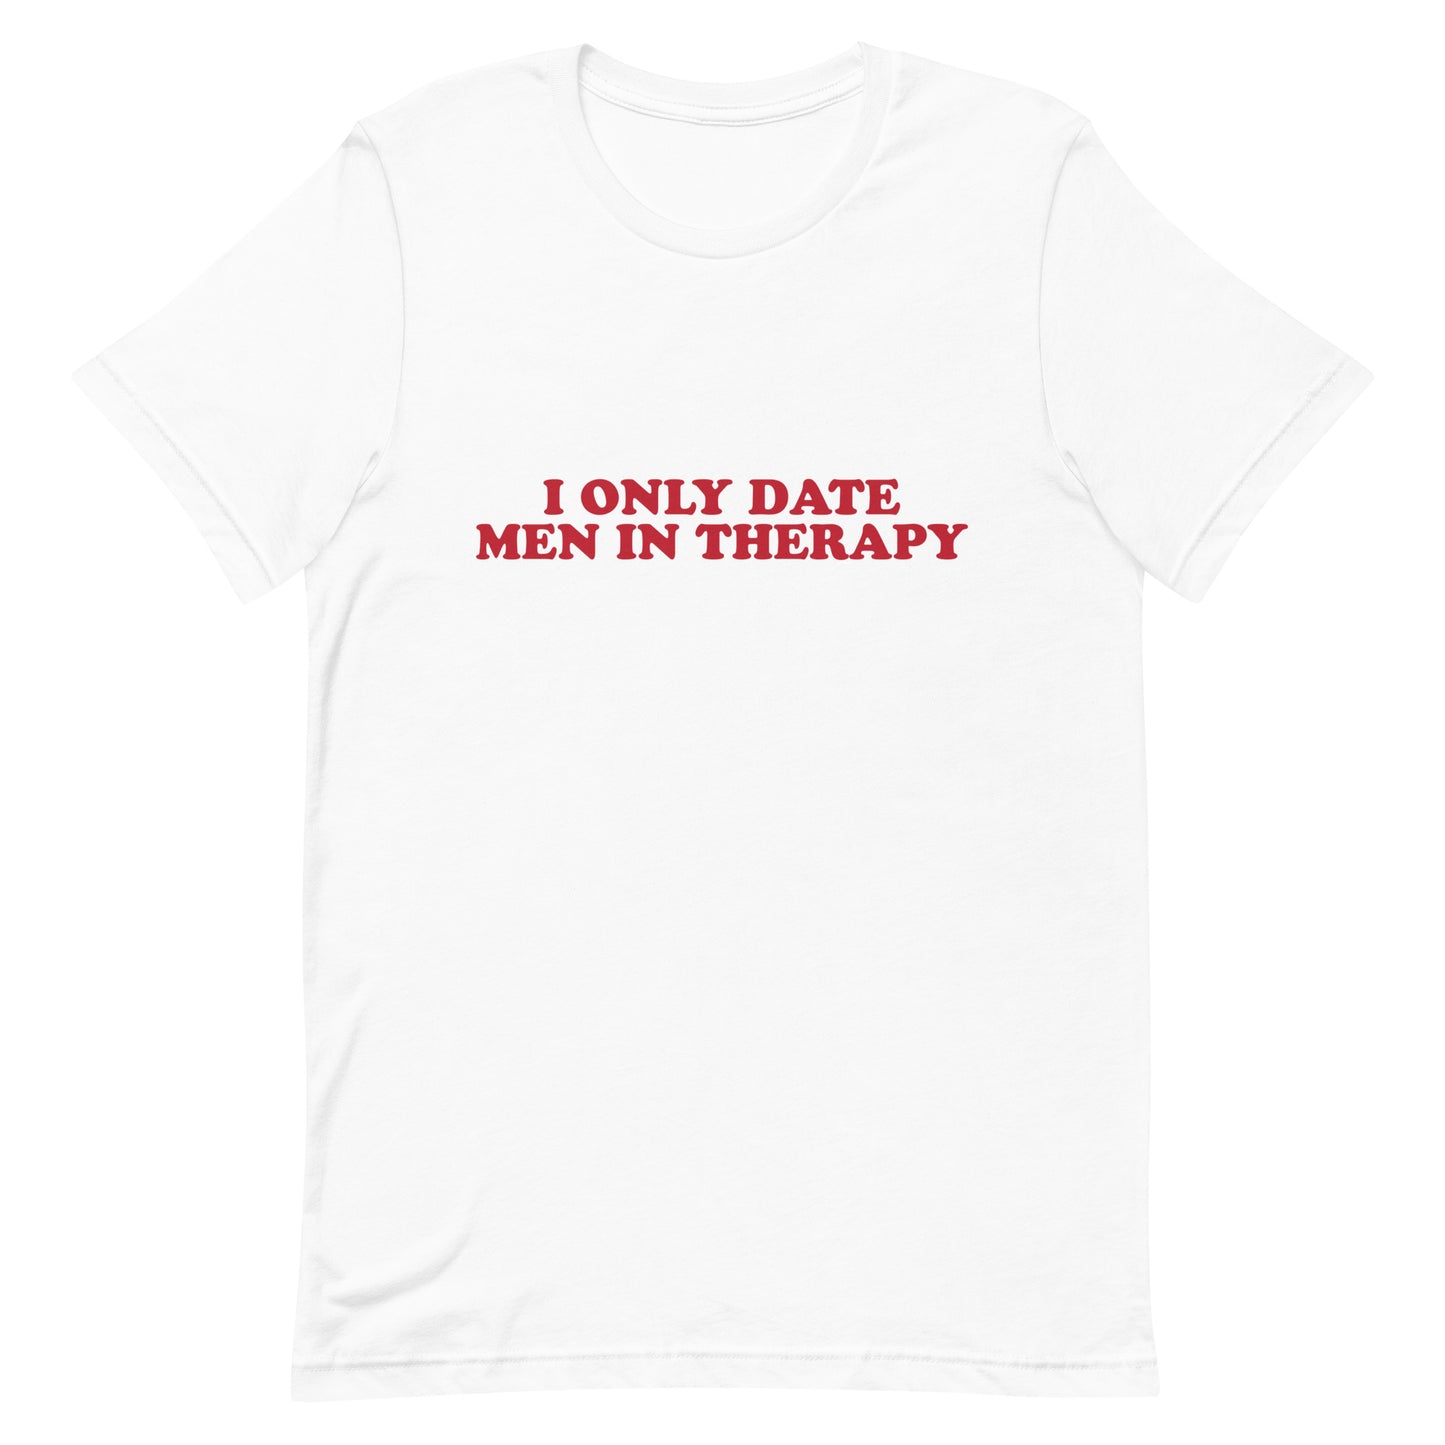 I Only Date Men in Therapy Unisex t-shirt